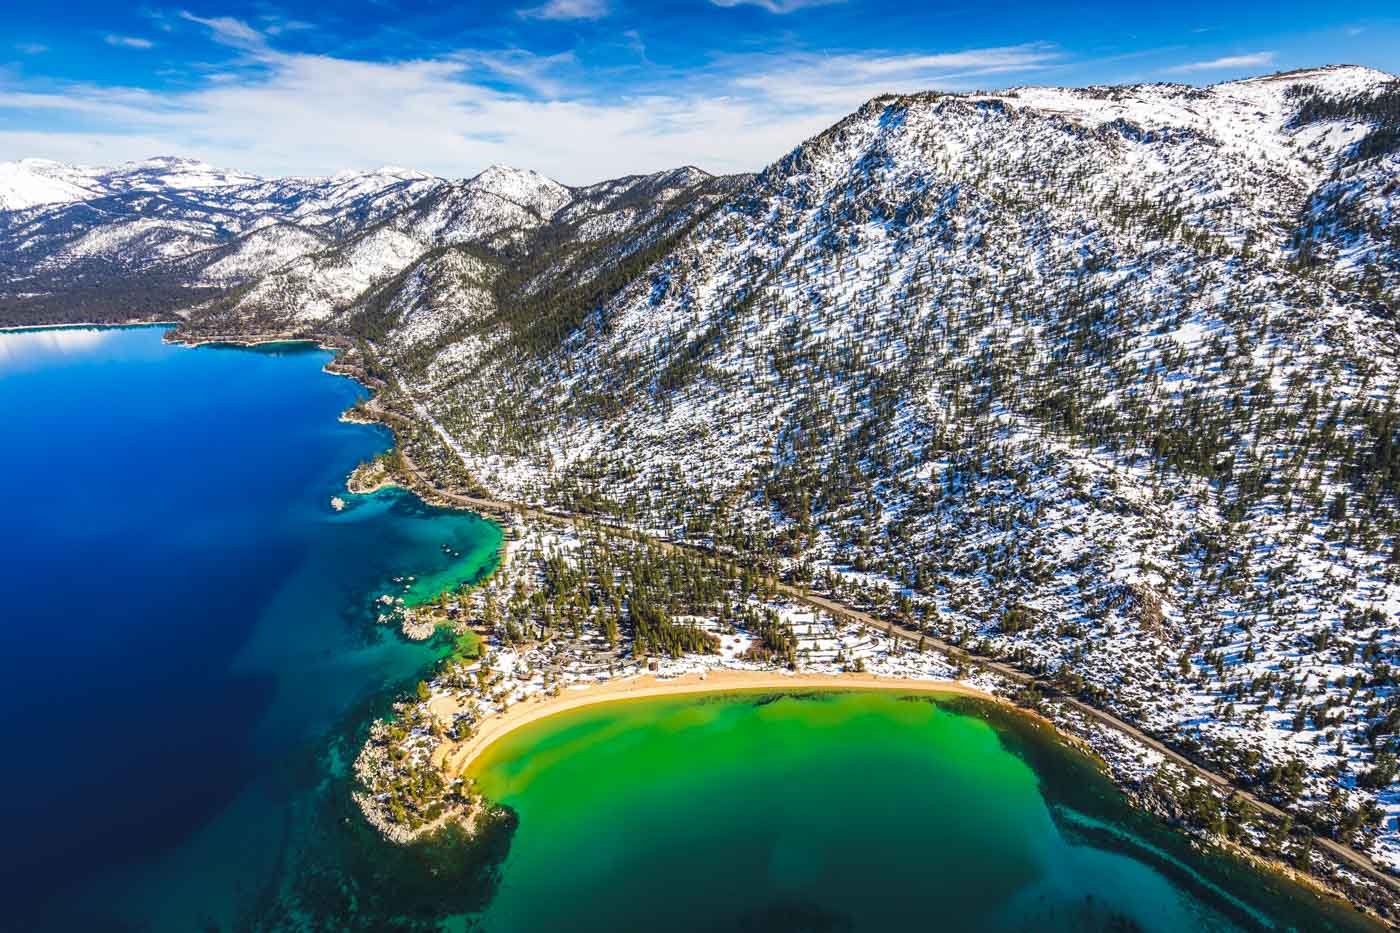 A beach along the shores of Lake Tahoe with some green water and with the surrounding area covered with snow as seen from a helicopter.